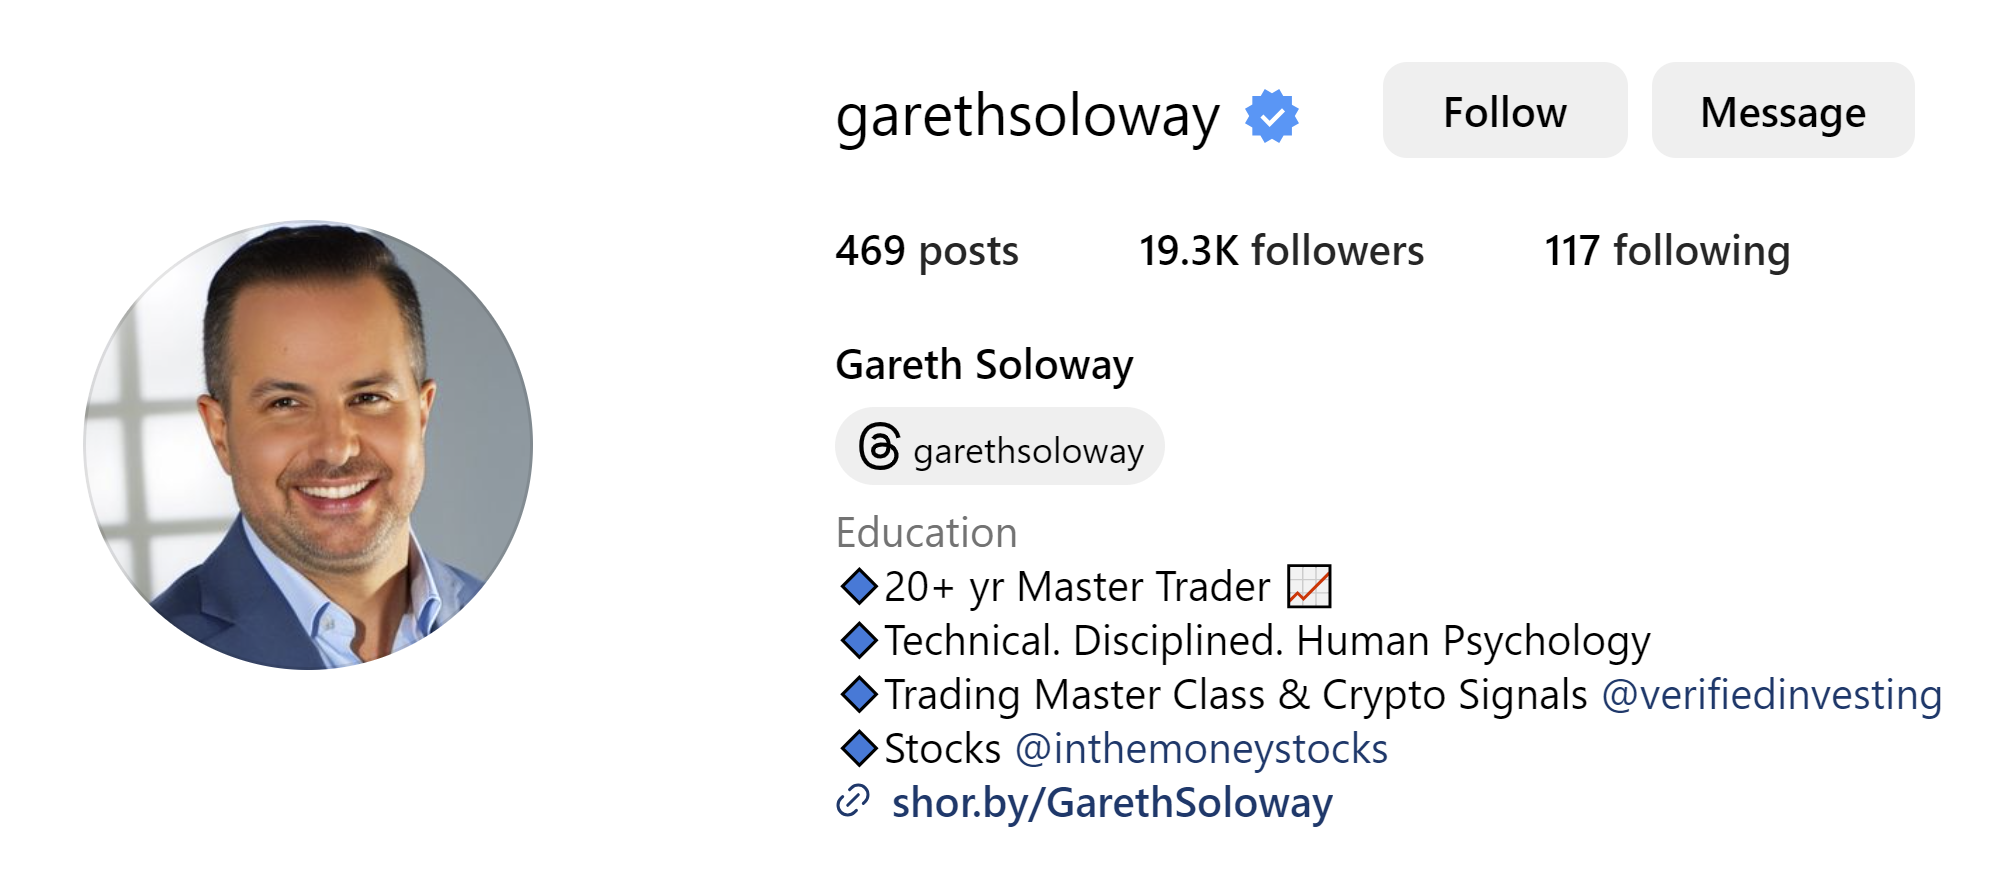 Who Is Gareth Soloway